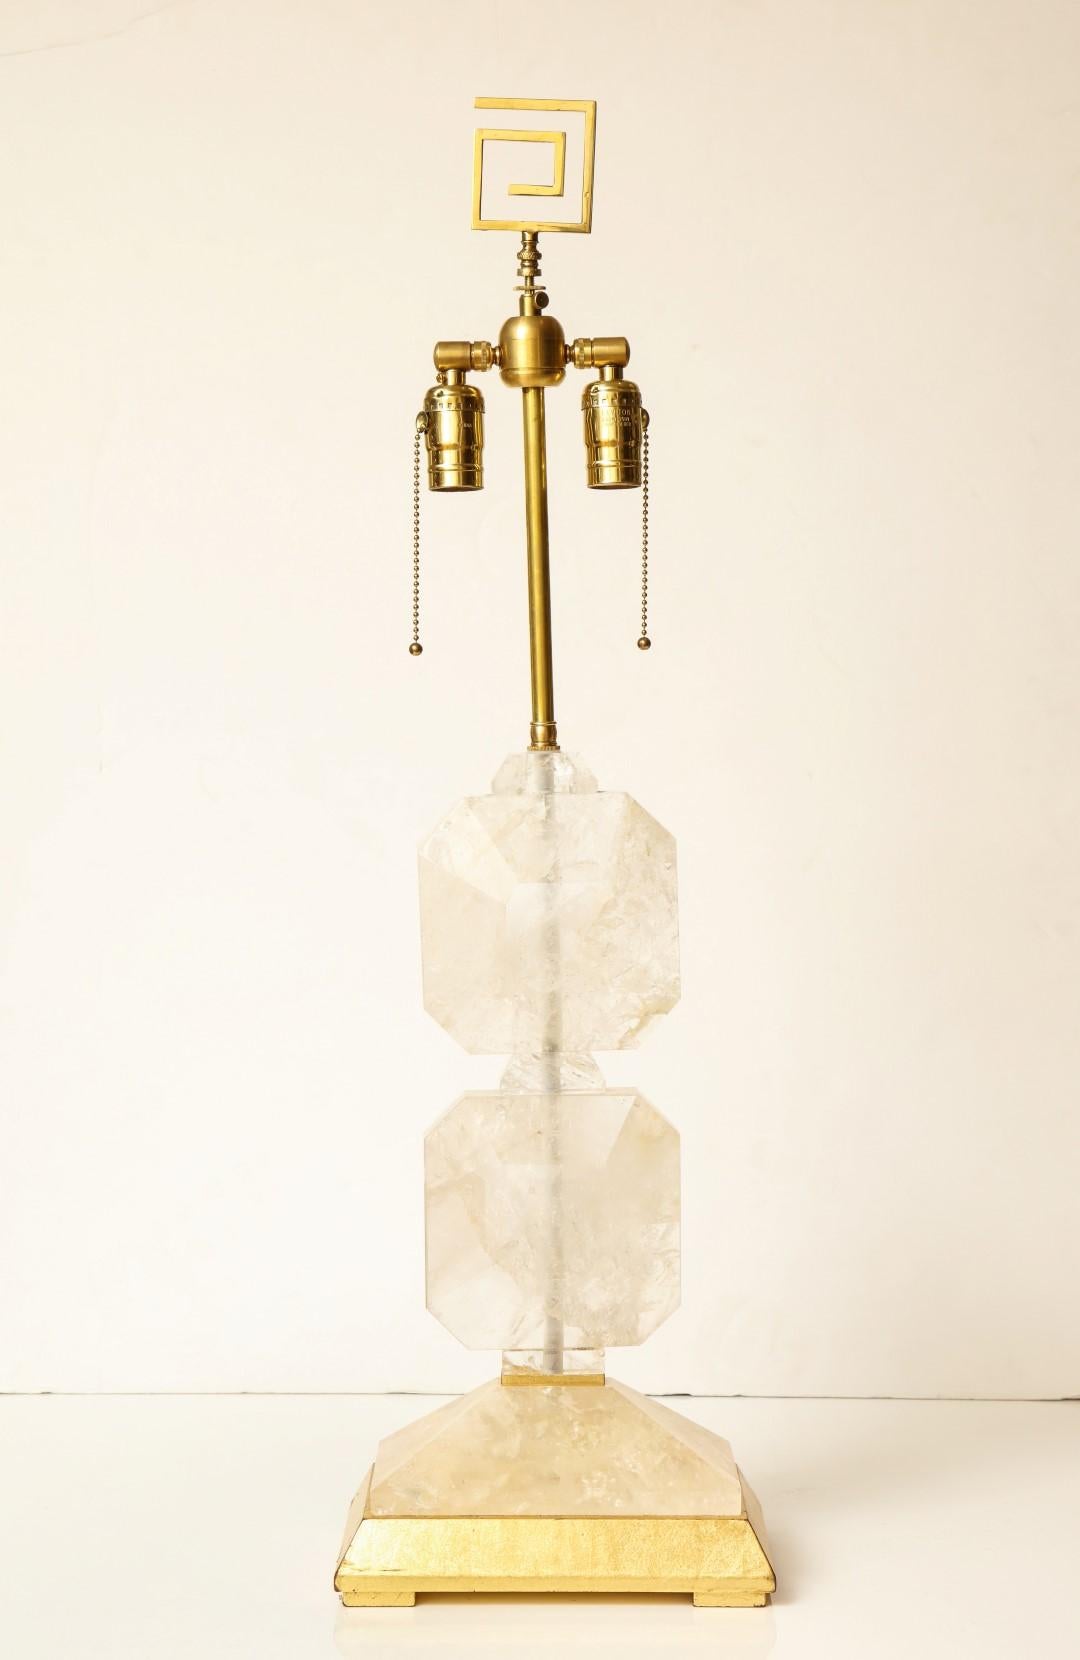 A pair of rock crystal table lamps with Greek key finial, giltwood base.